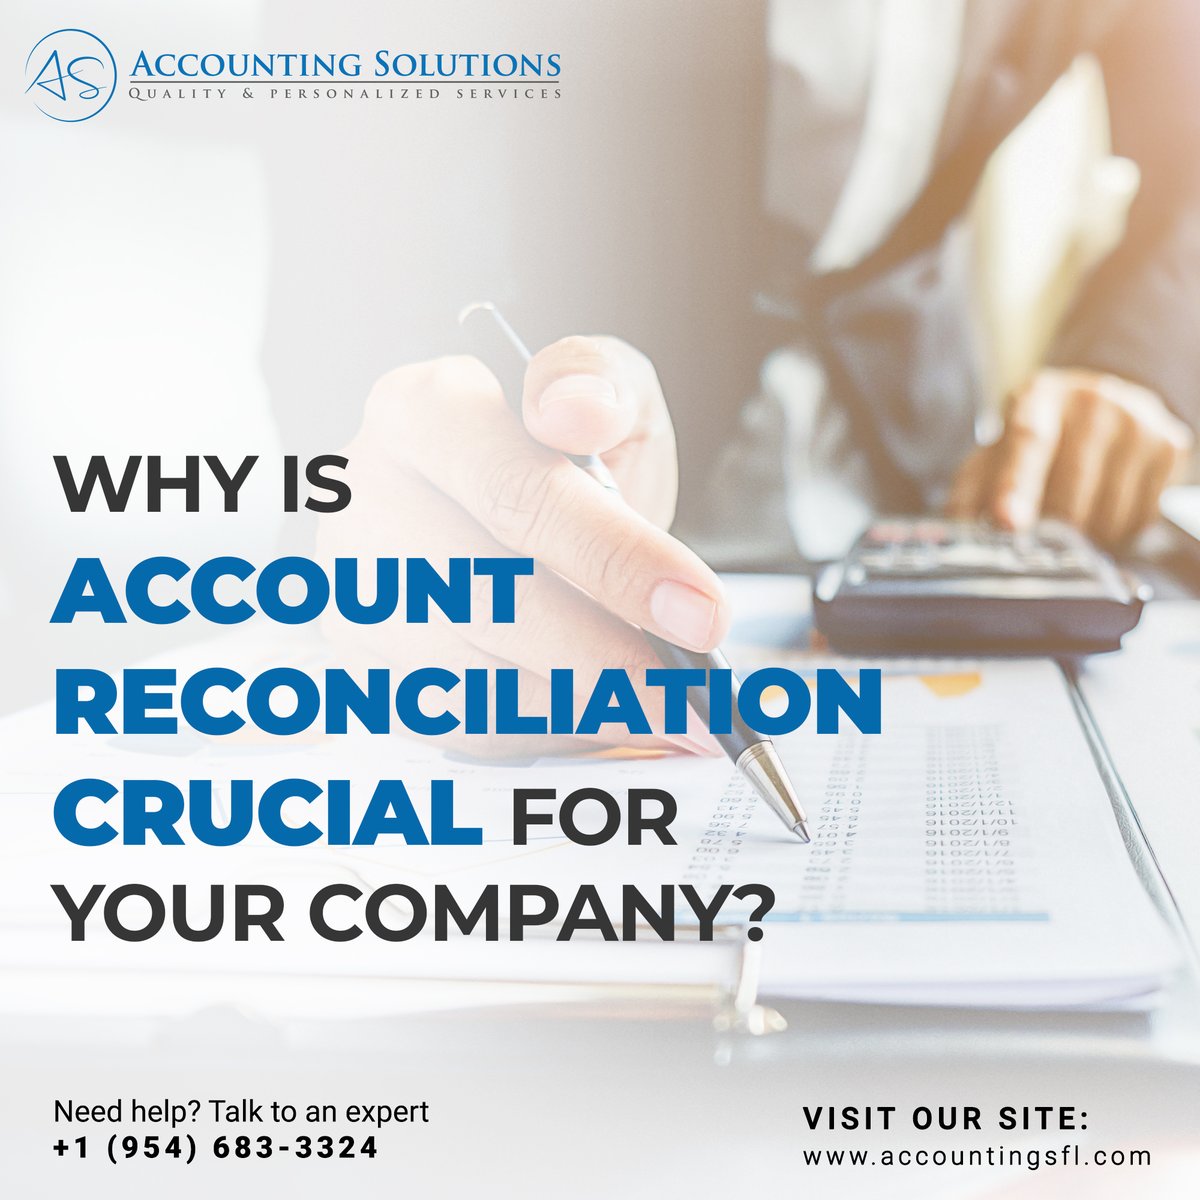 Overall, account reconciliation is a critical process for any company that wants to maintain accurate, complete, and reliable financial records.

#account #reconciliation #accountreconciliation #financialrecords #AccountingSolutions #SouthFlorida #business #florida